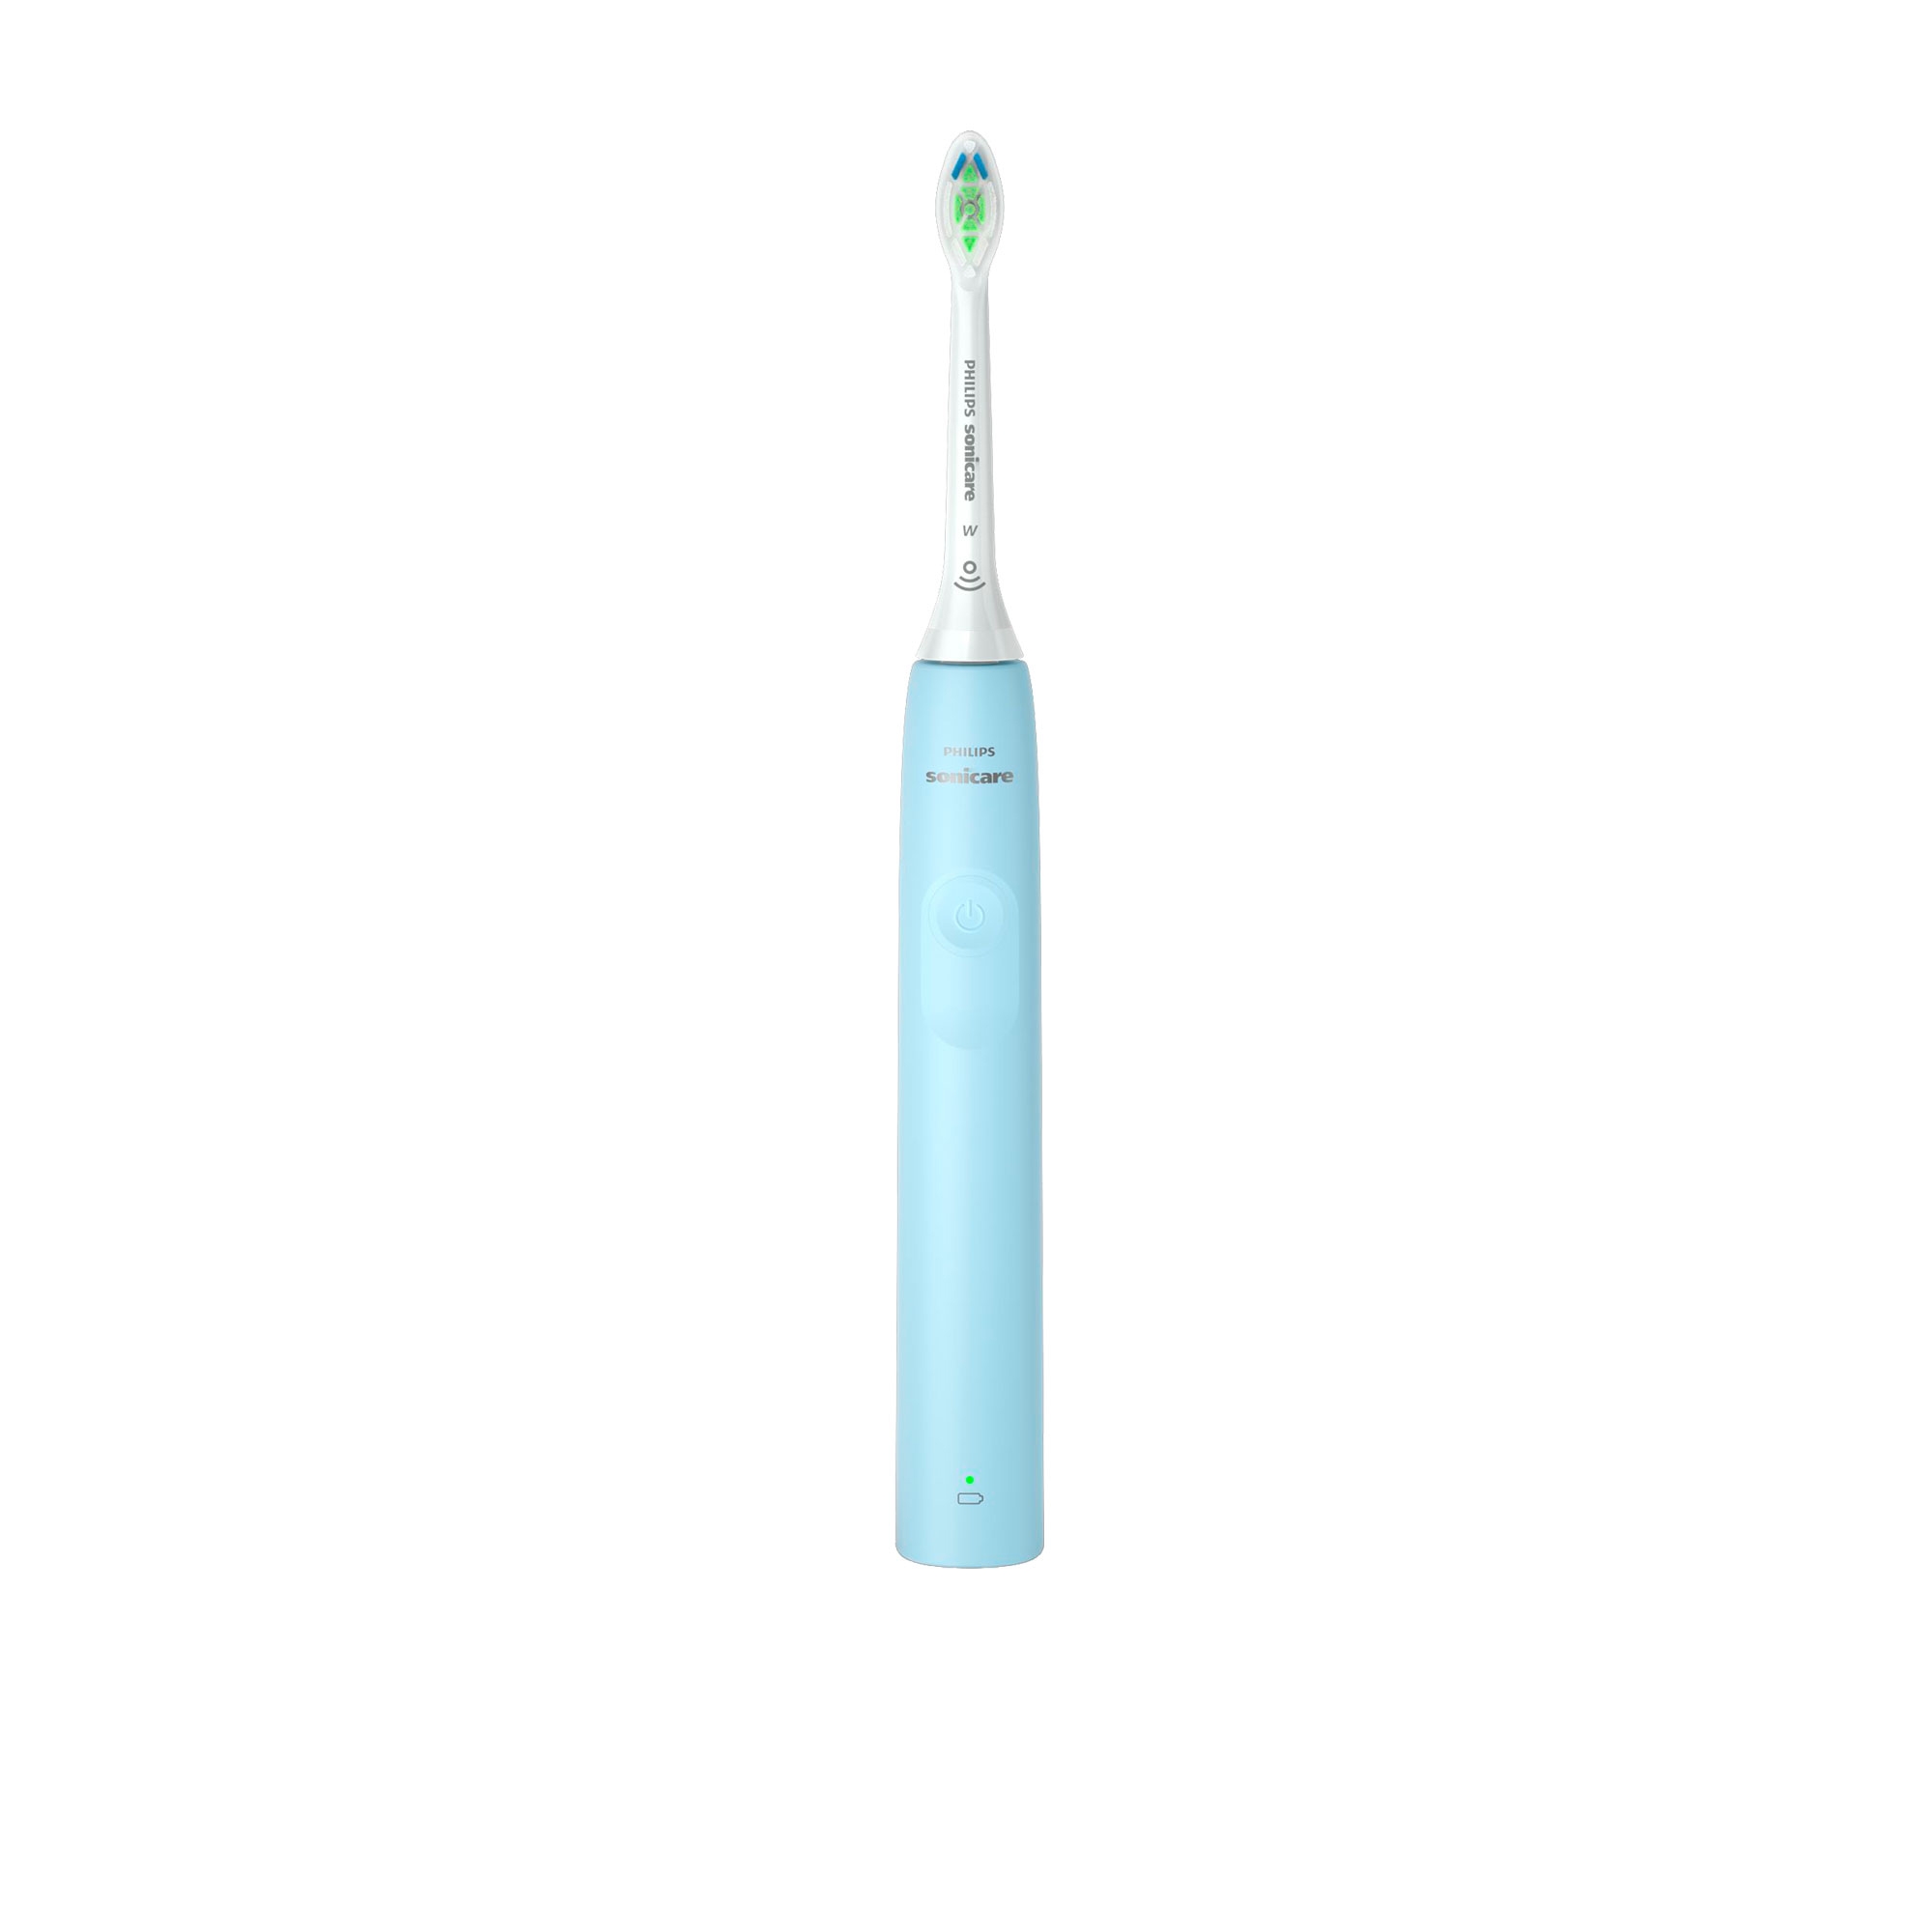 Philips Sonicare 2100 Series Electric Toothbrush Baby Blue Image 1